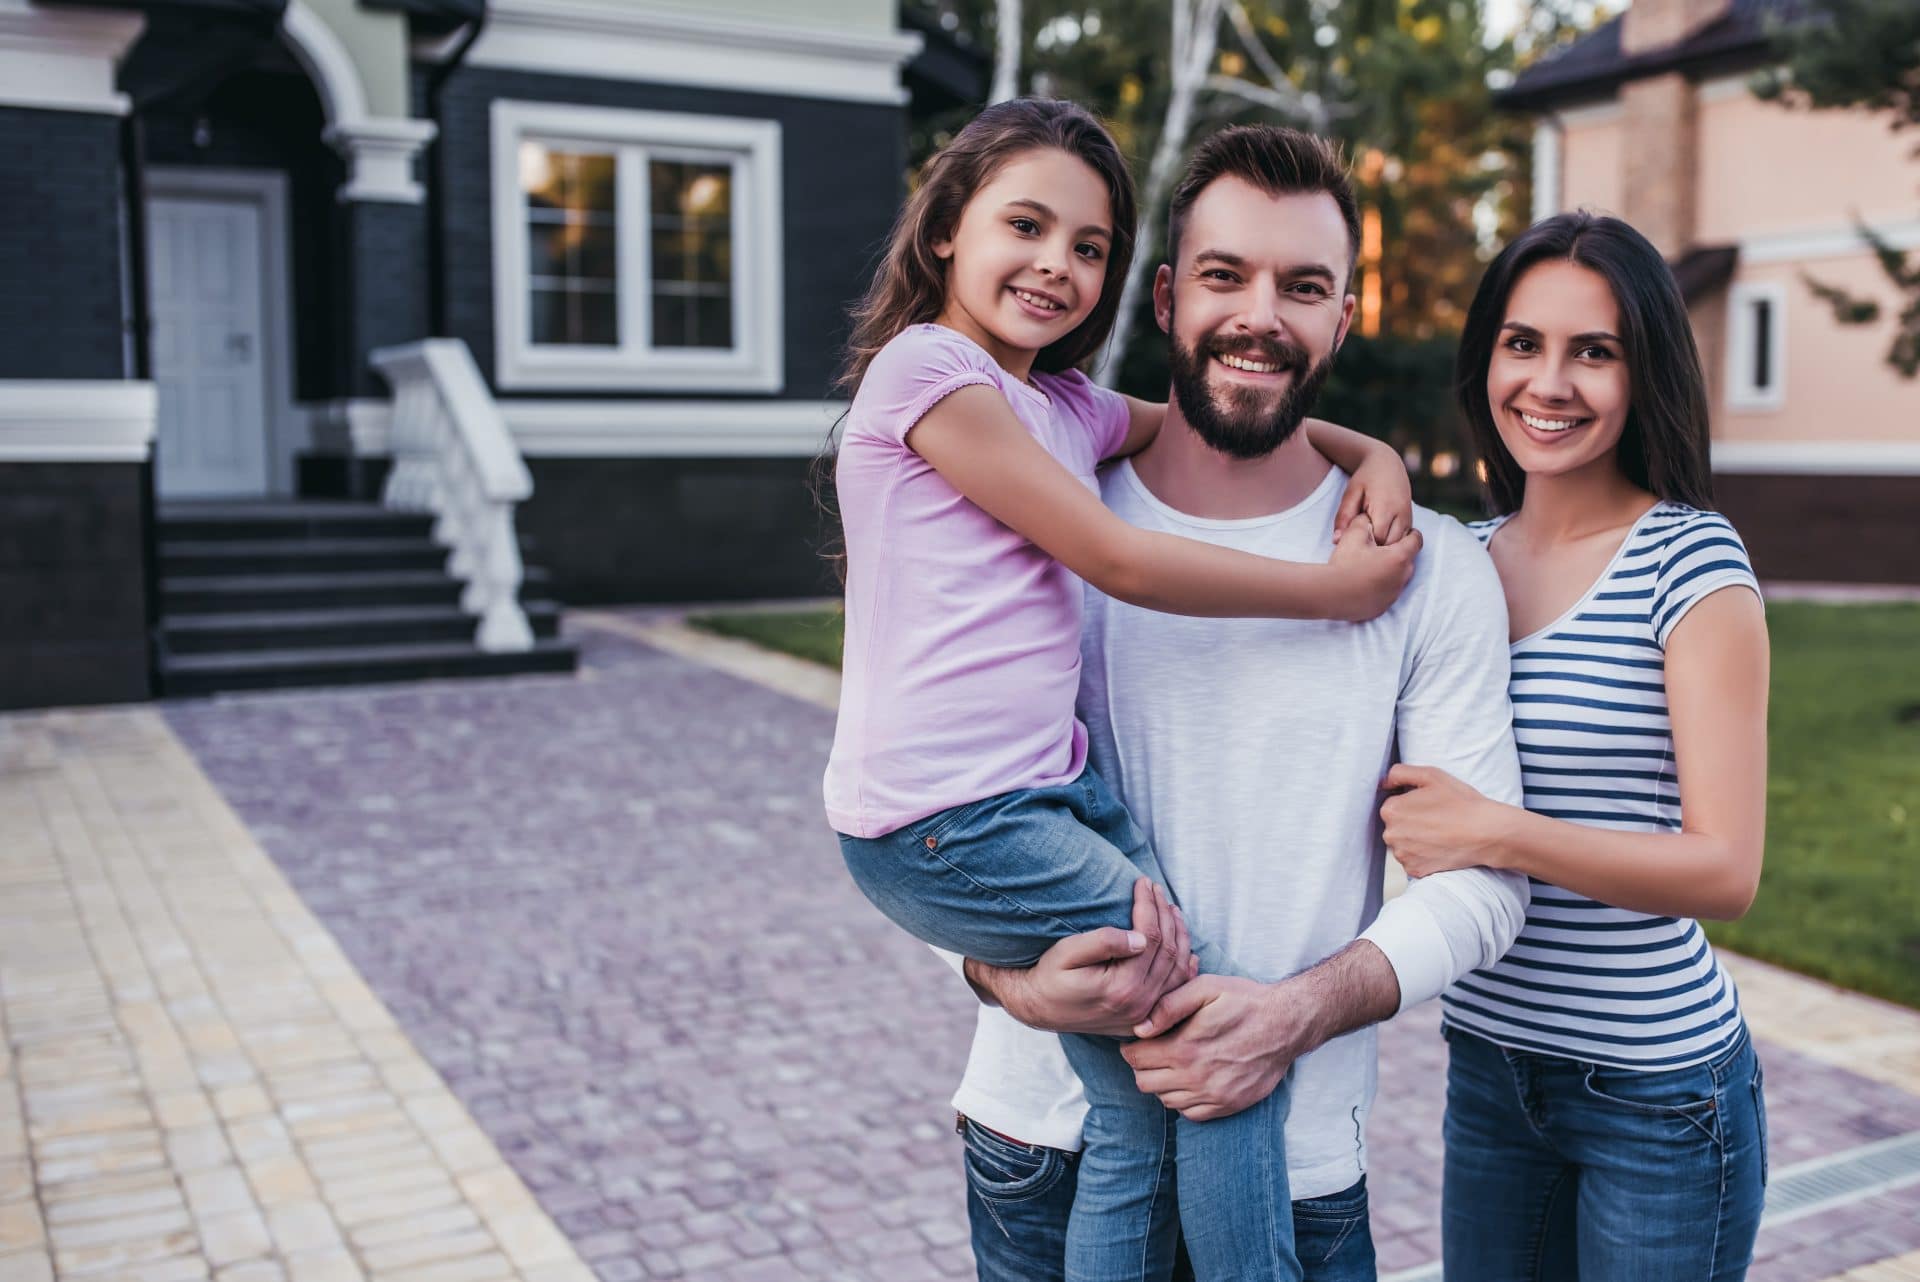 Family using the homestead exemption